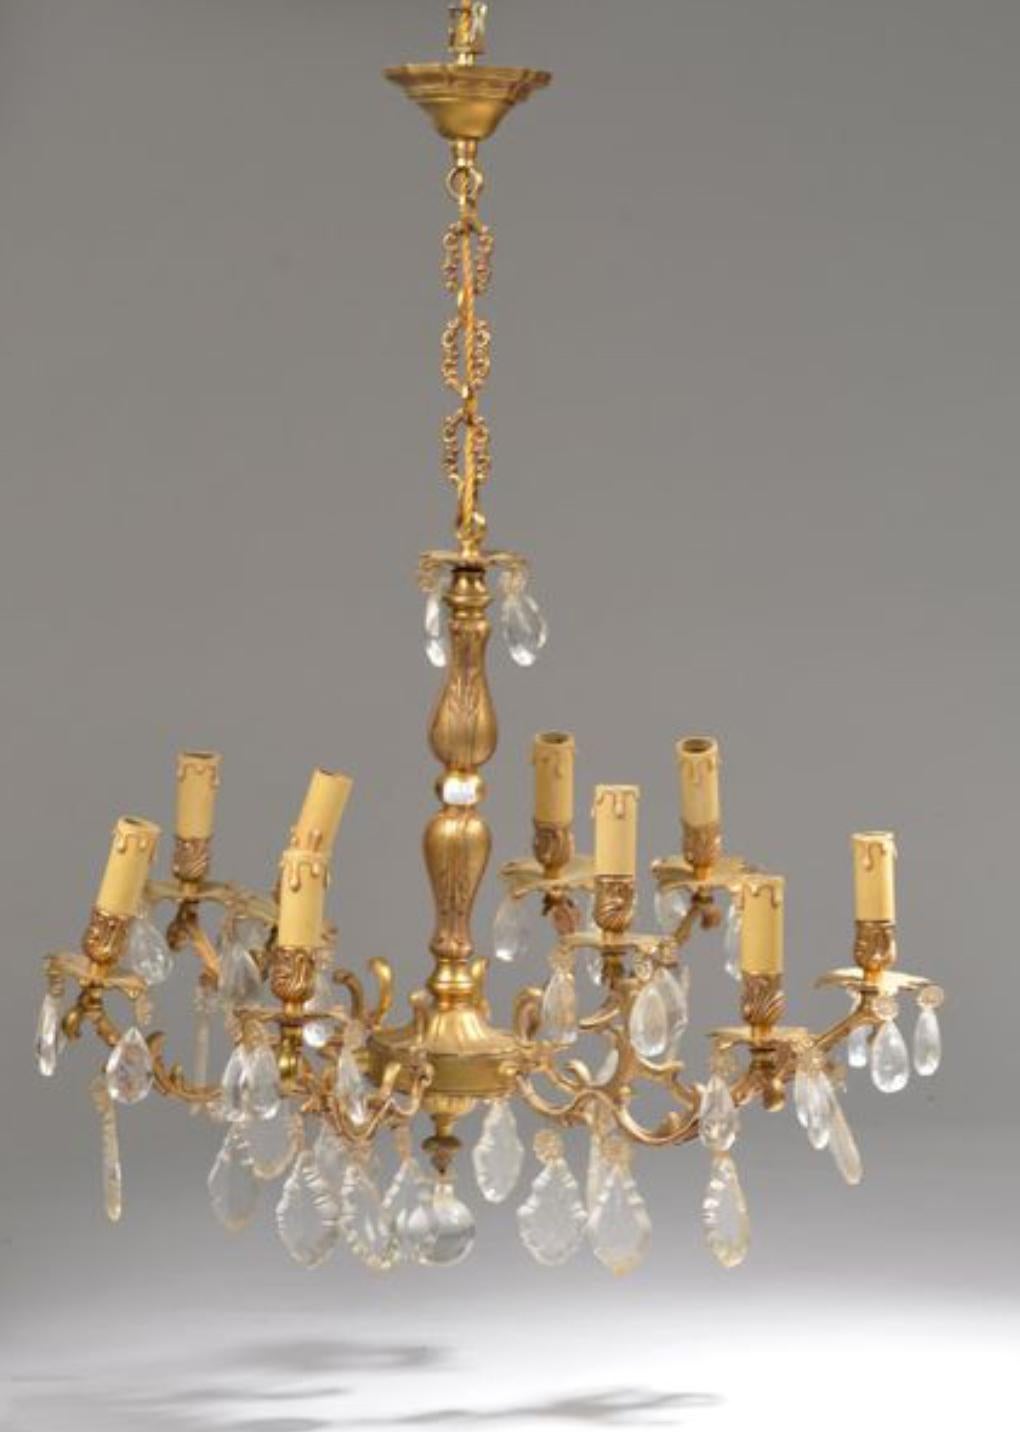 20th Century Bronze Chandelier with Crystal Decorations in Louis XV Style For Sale 1